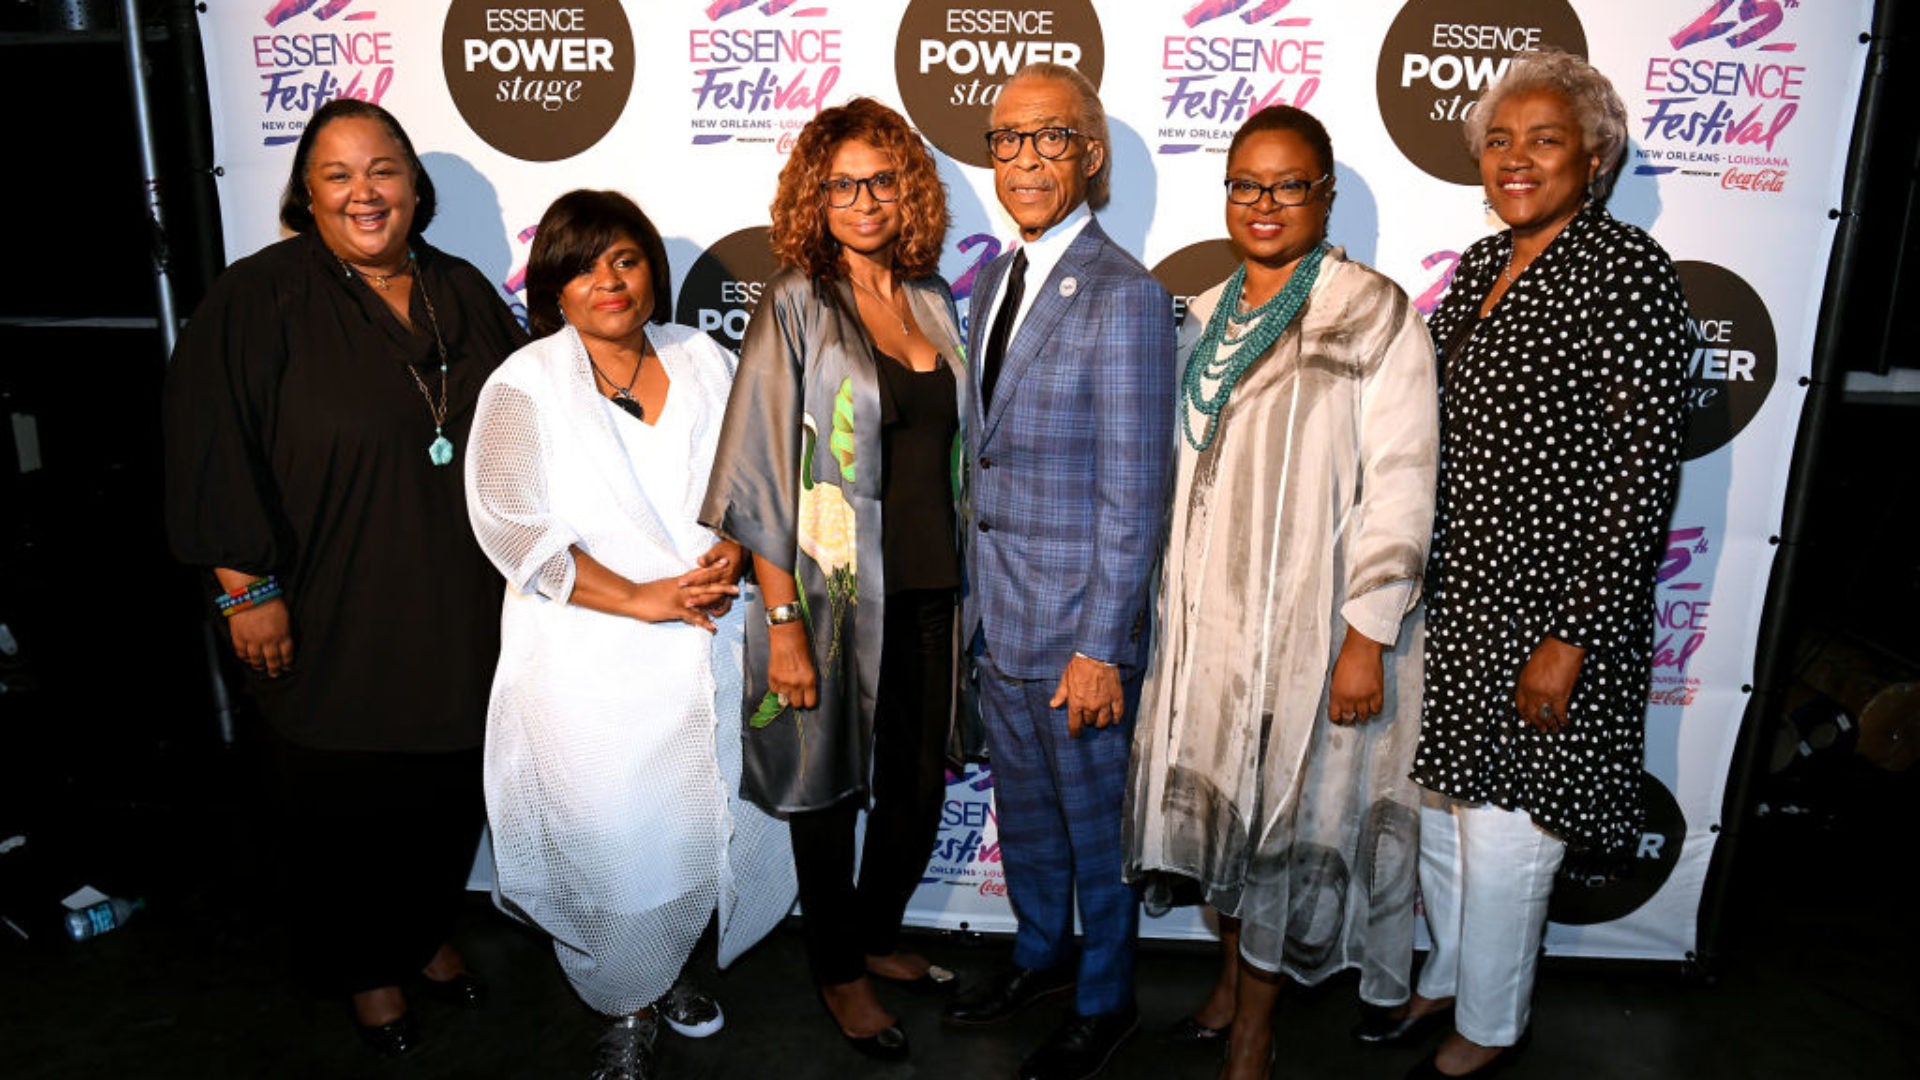 'For Colored Girls Who Have Considered Politics' Authors Drop Knowledge On 2019 Essence Festival Power Stage